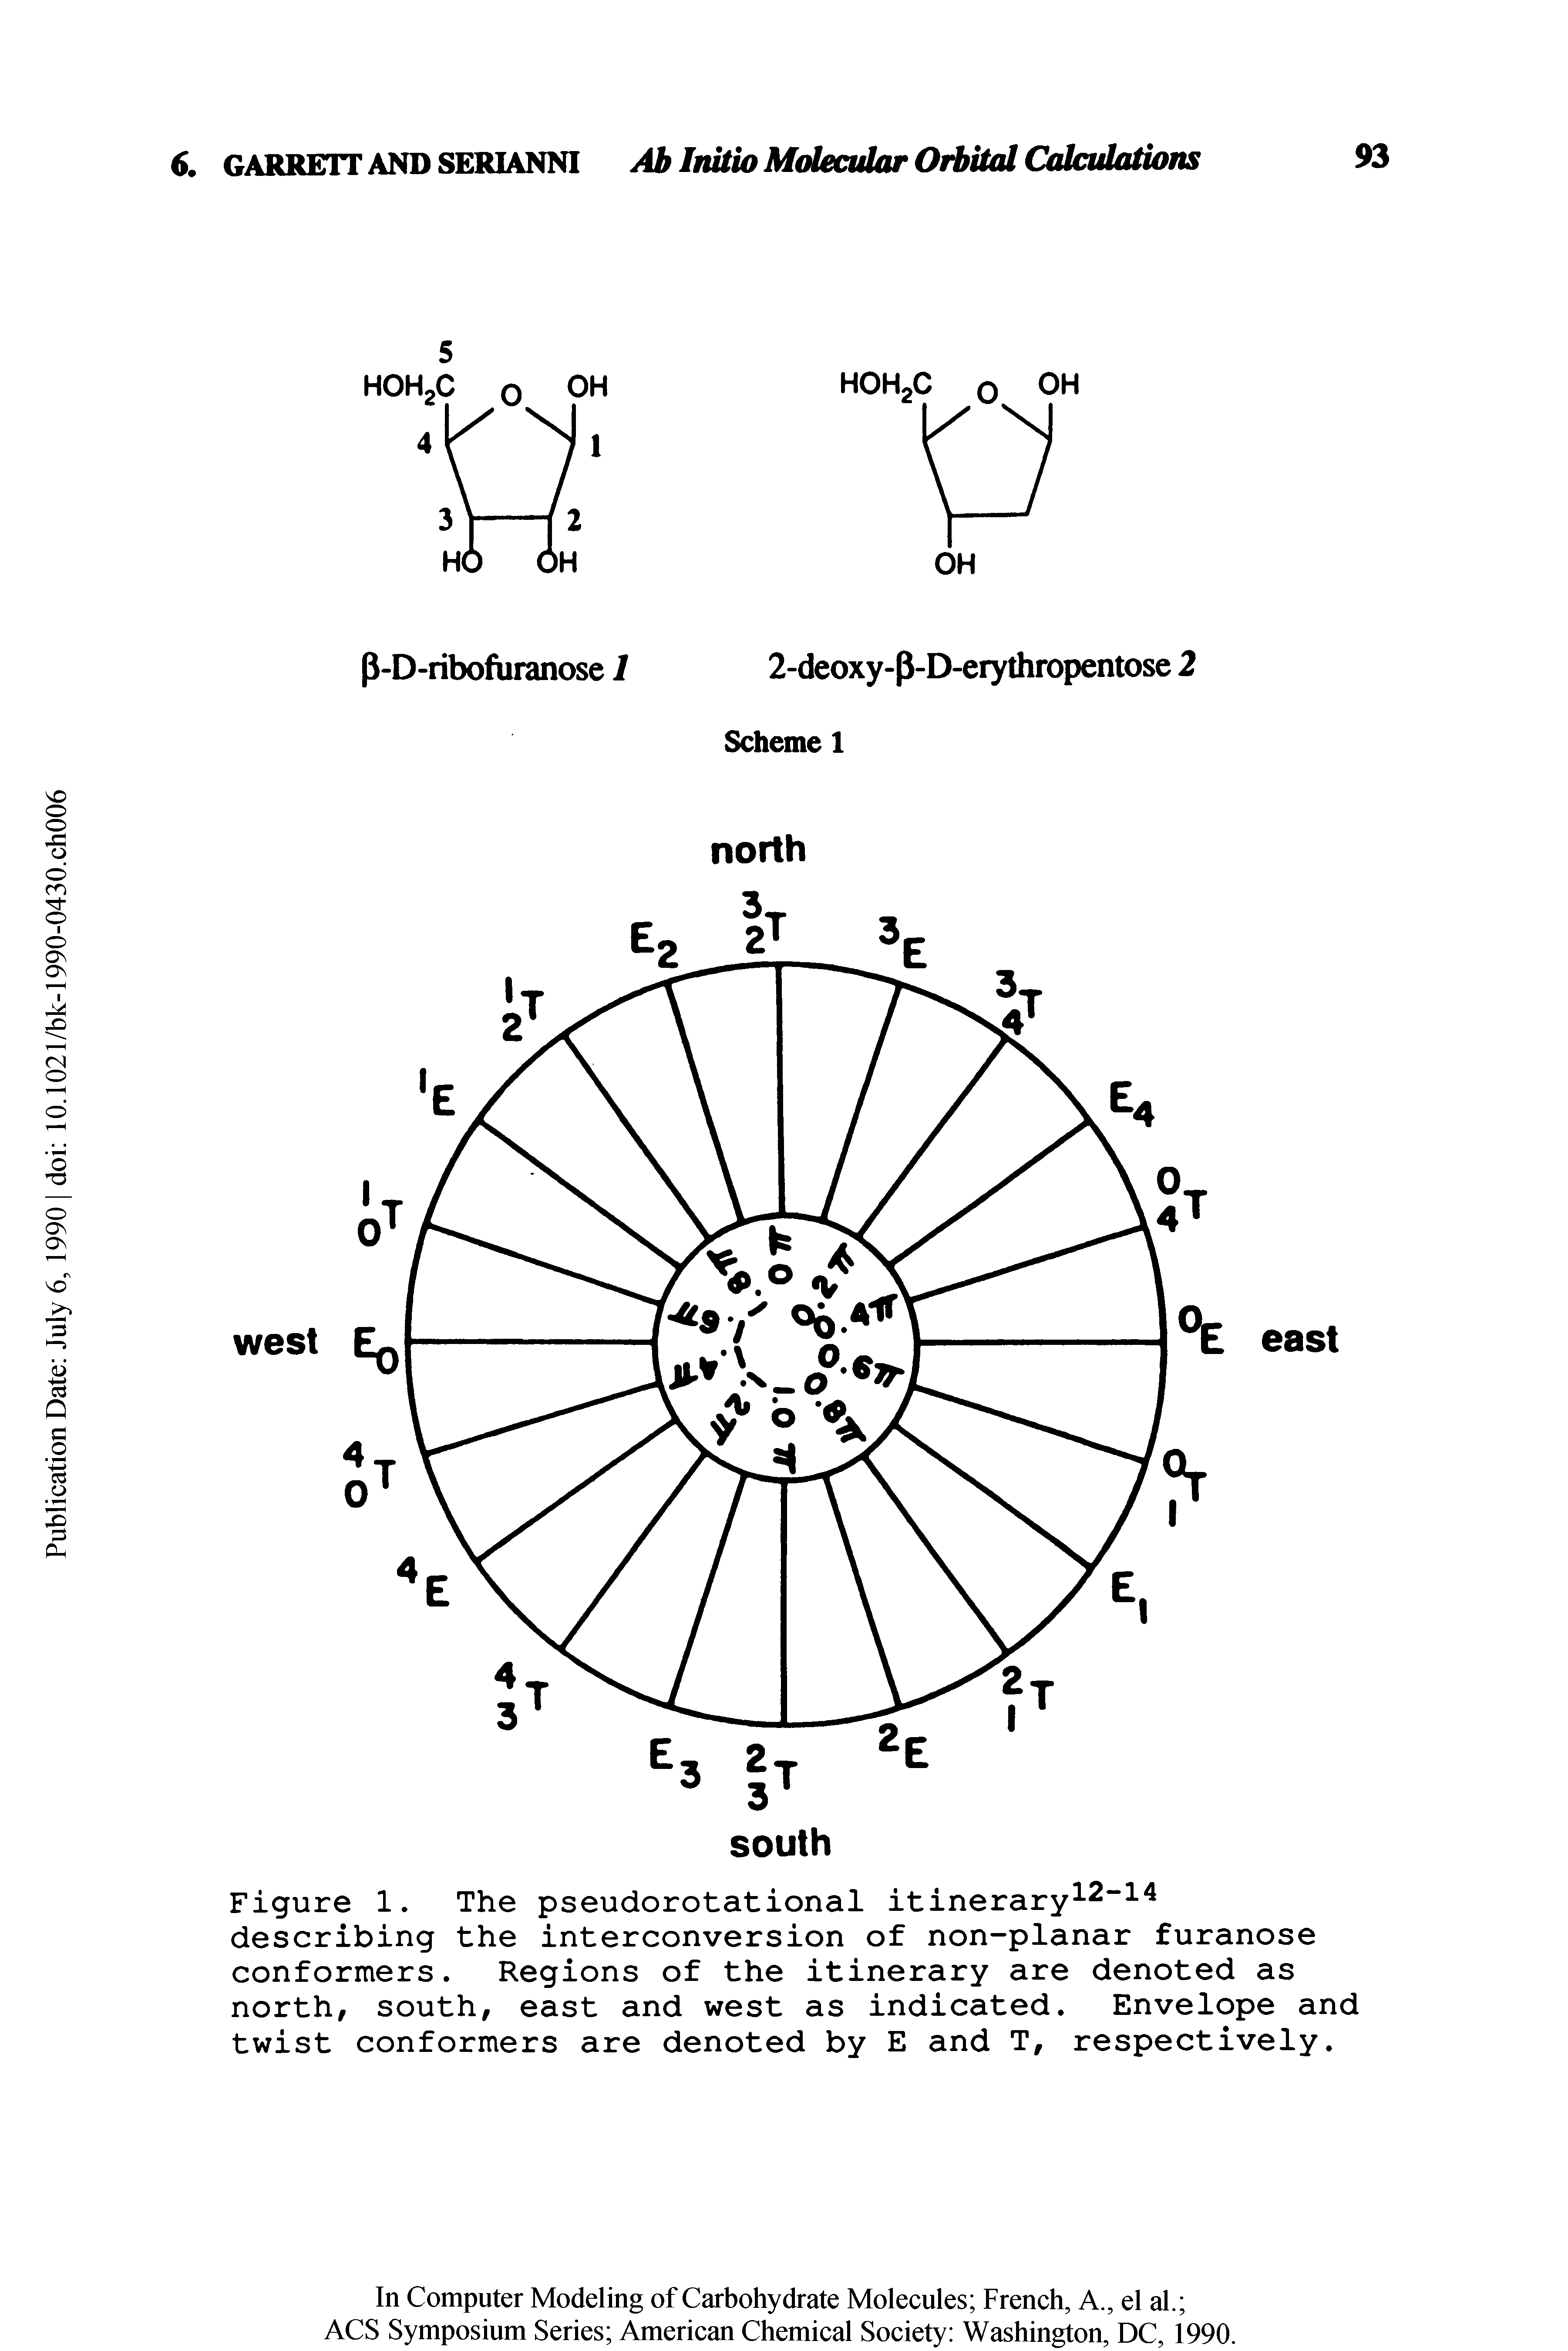 Figure 1. The pseudorotational itinerary 2-14 describing the interconversion of non-planar furanose conformers. Regions of the itinerary are denoted as north, south, east and west as indicated. Envelope and twist conformers are denoted by E and T, respectively.